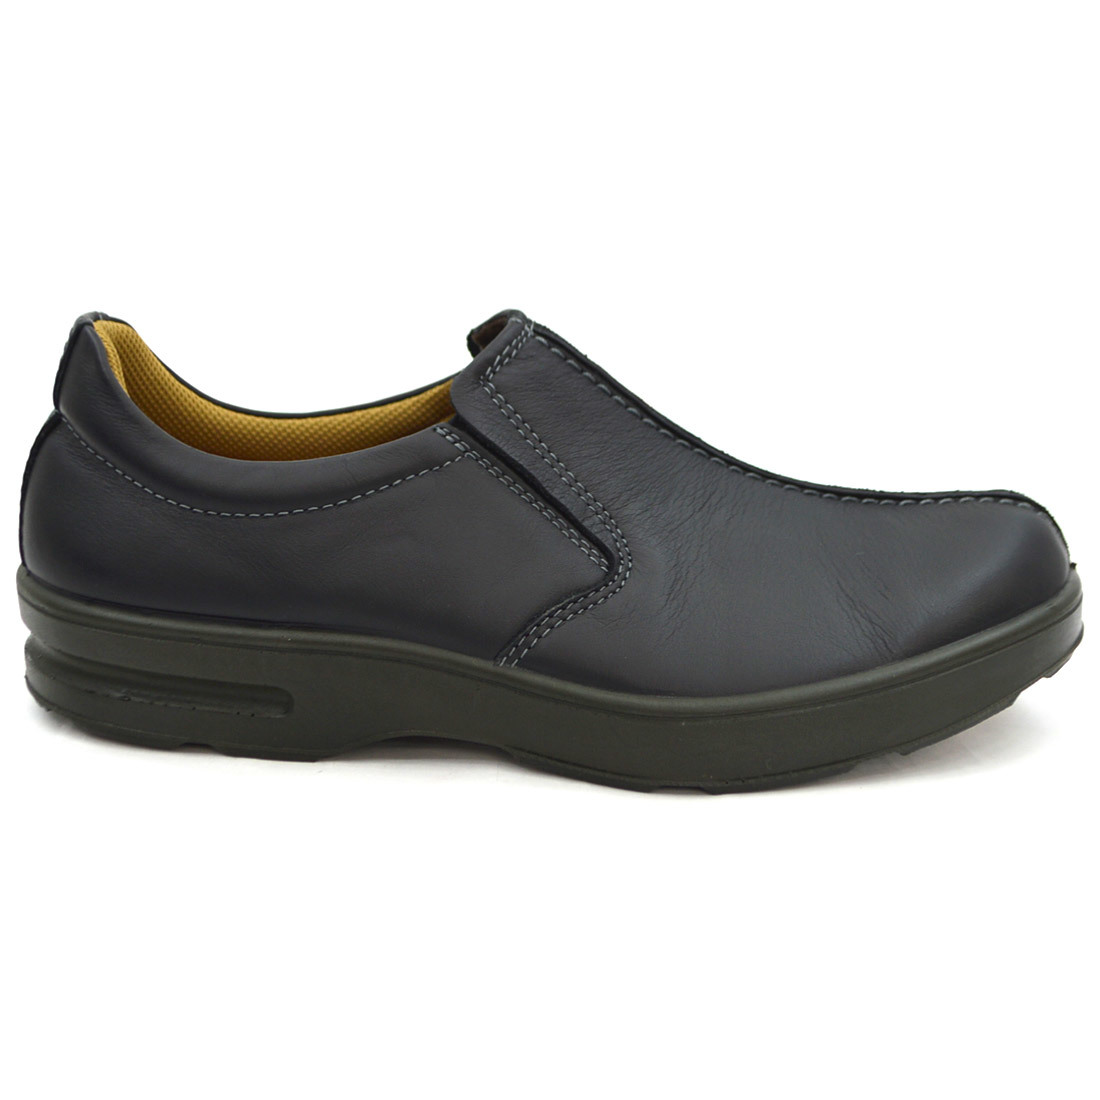 ^BOBSON Bobson casual shoes walking slip-on shoes 4509 original leather made in Japan navy Navy navy blue 25.5cm (0910010564-na-s255)